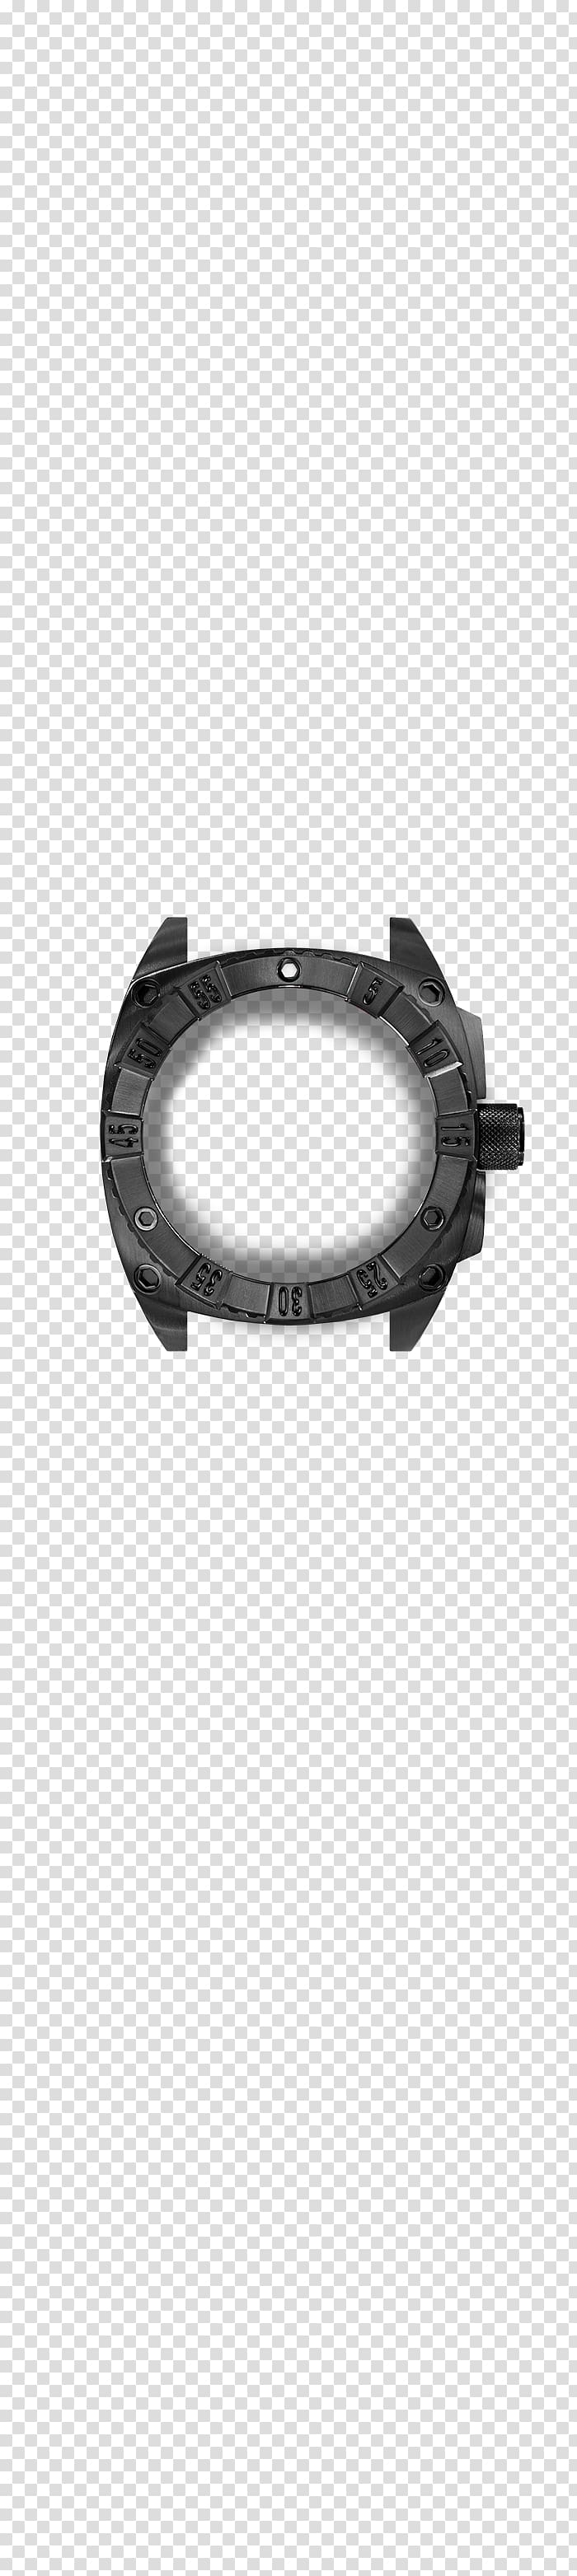 Military watch Dial Stainless steel, watch transparent background PNG clipart